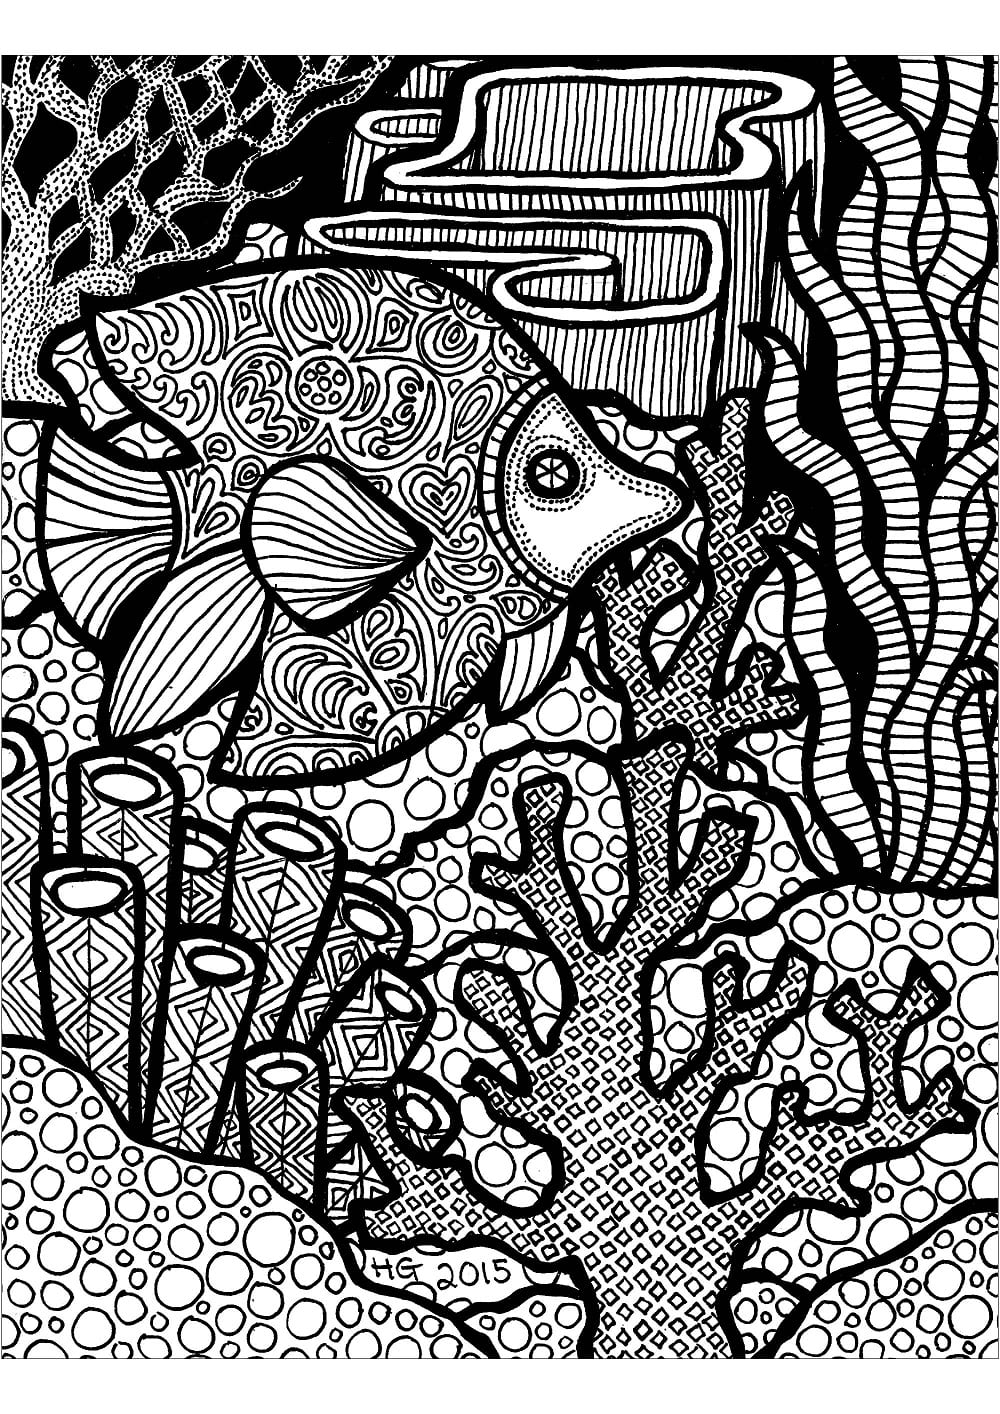 Zentangle Fish coloring page - Download, Print or Color Online for Free